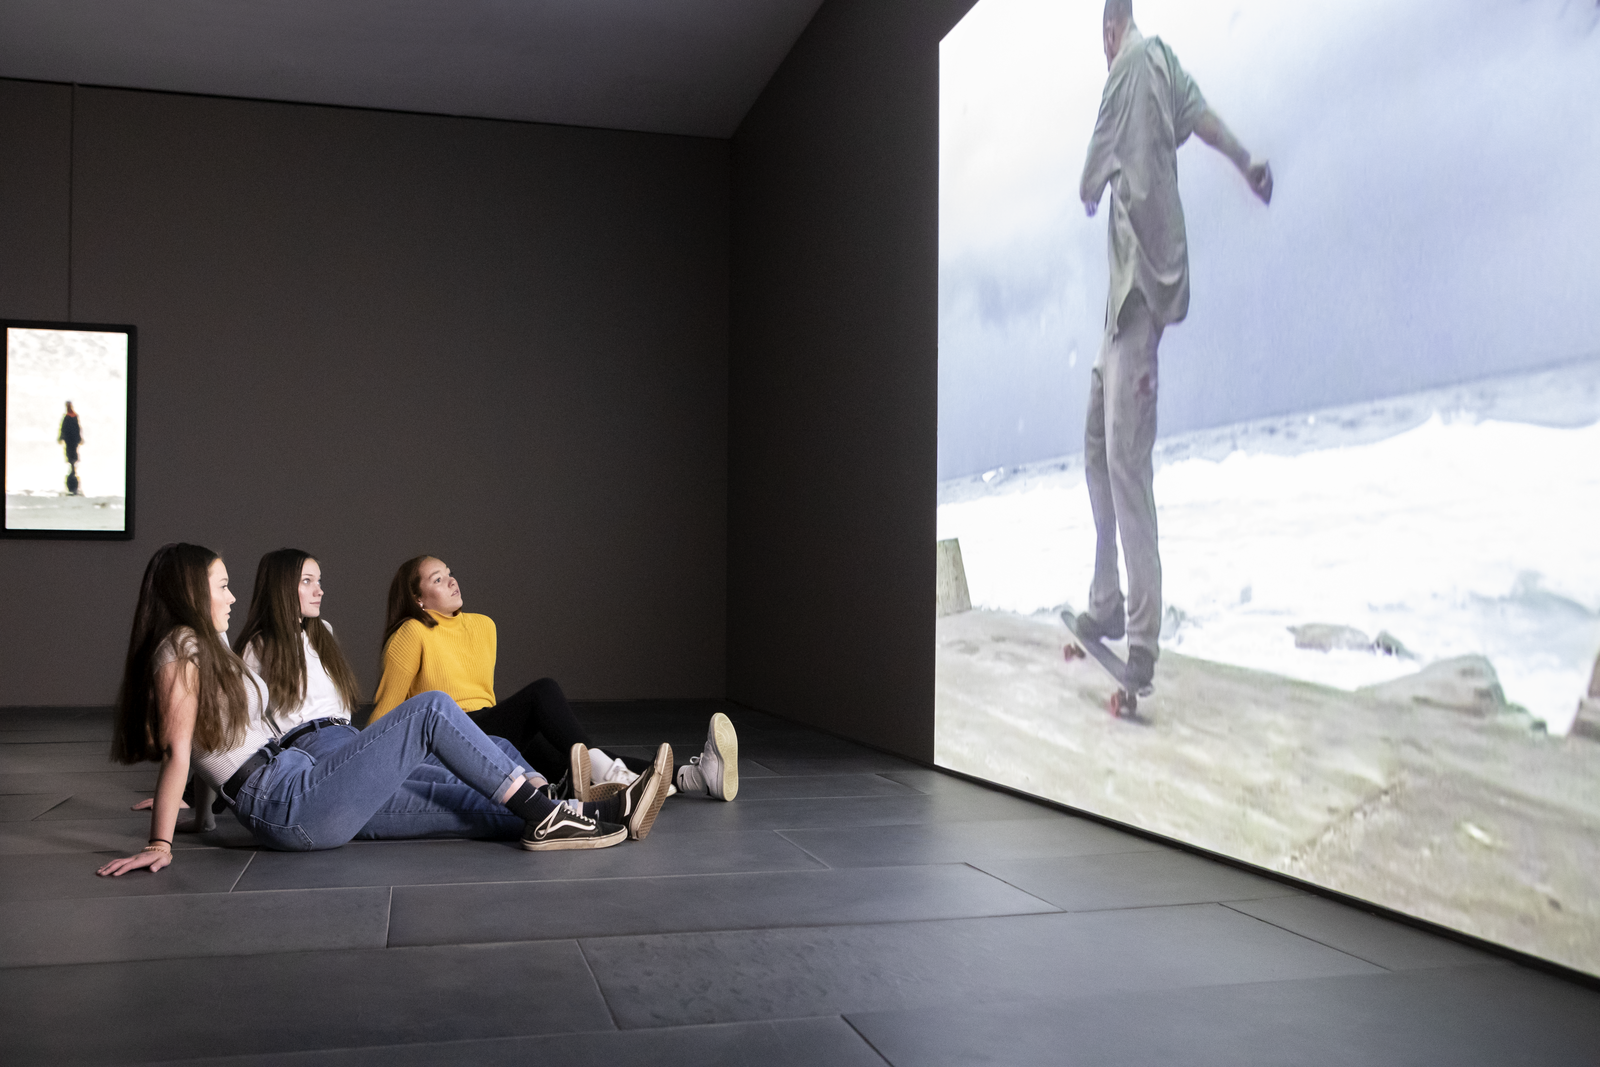 Three teenagers sit on the floor and watch a large audio visual installation projected onto a wall